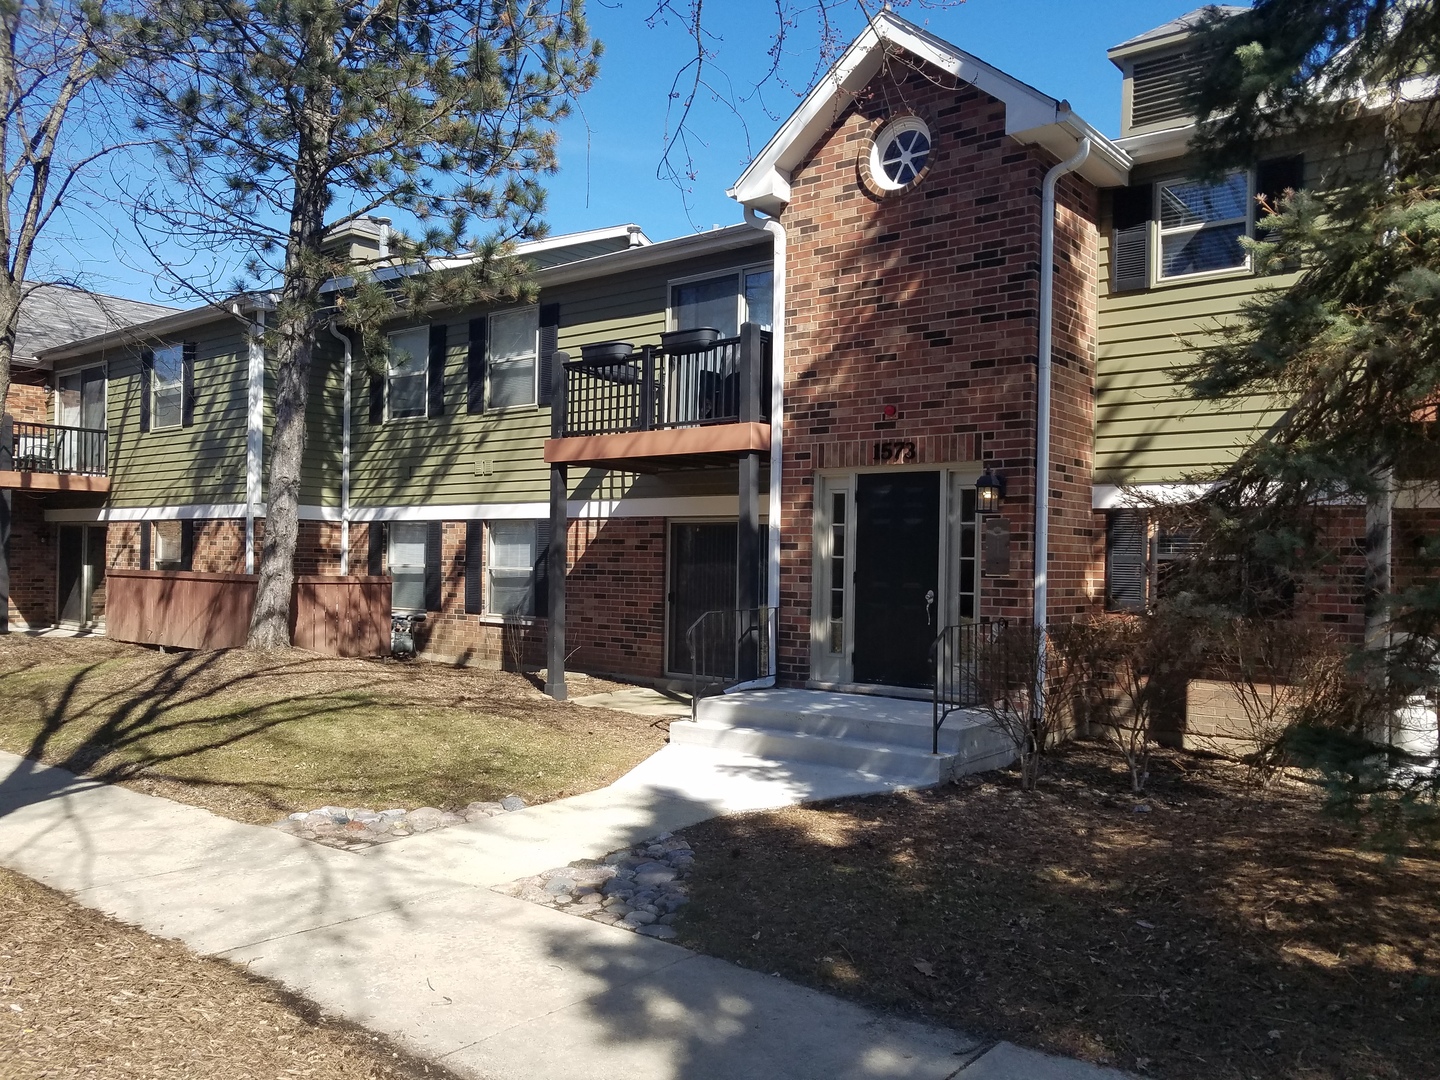 1573 Raymond Dr #104, Naperville, IL 60563 - MLS 09834102 - Coldwell Banker